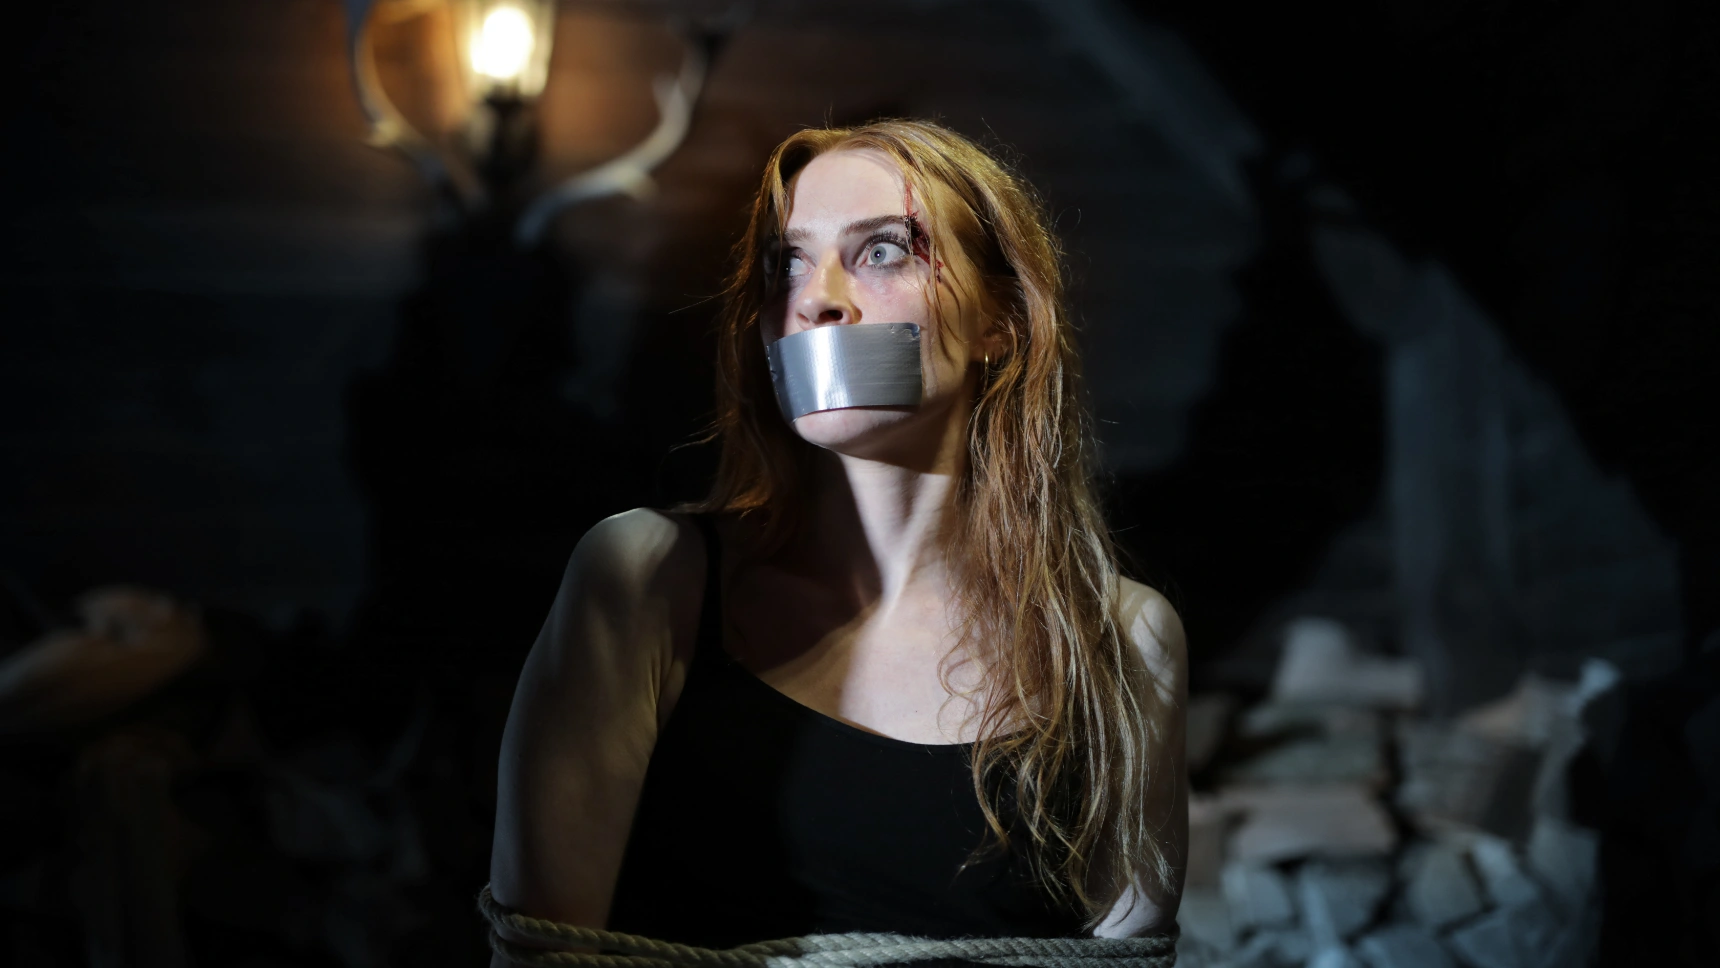 One picture shows a woman whose mouth is taped.